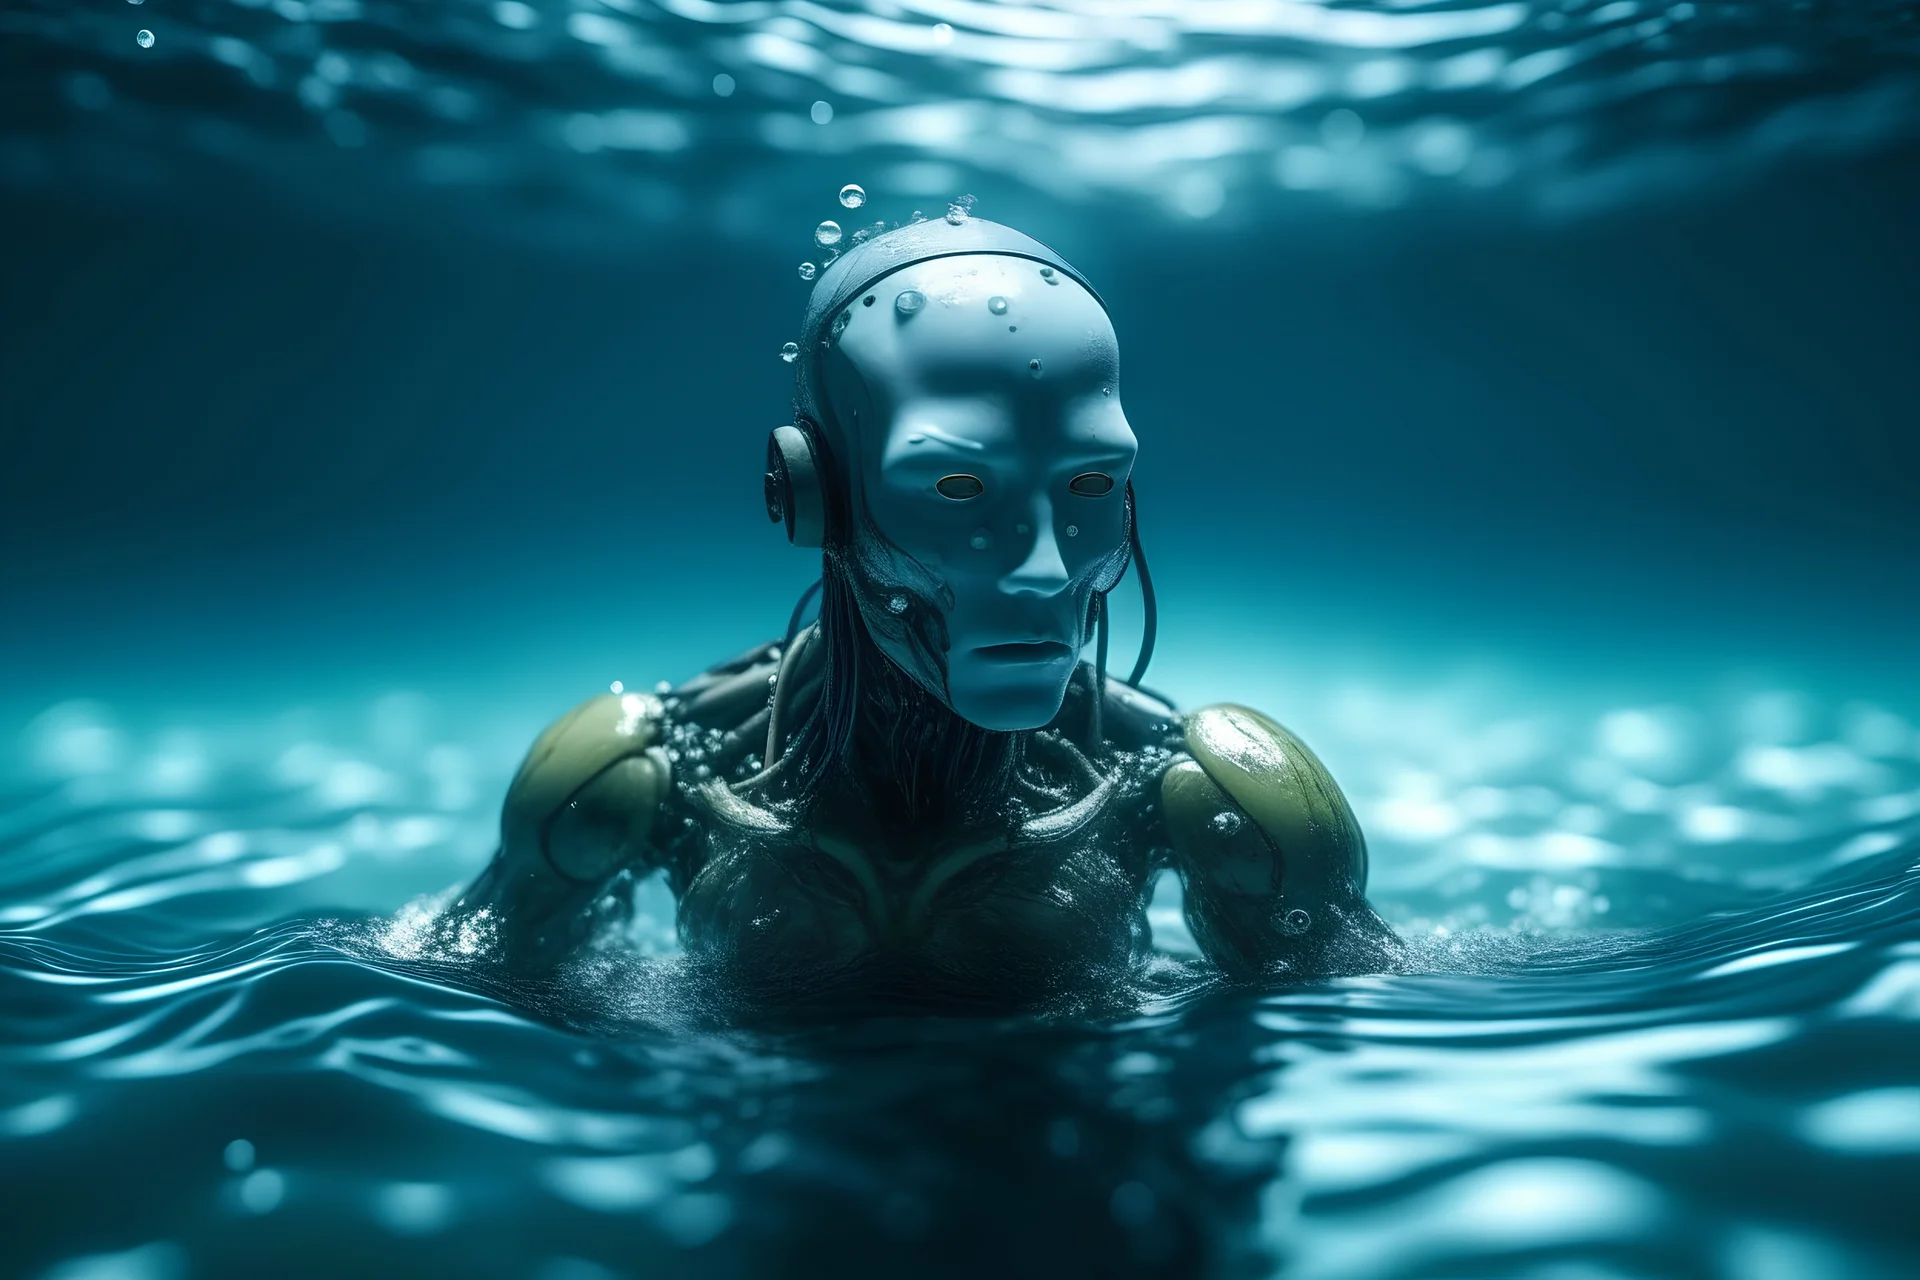 Please artistic photograph of an inverted, distorted robotic male in a watery ocean. Create a close-up, foggy, chromatic technicolor, and dreamlike atmosphere. Consider using lenses like sigma 85mm f/1.4, 15mm, or 35mm. Opt for high resolution (e.g., 4k, 8k, HD). Experiment with smears of primary color on the film. Thanks.